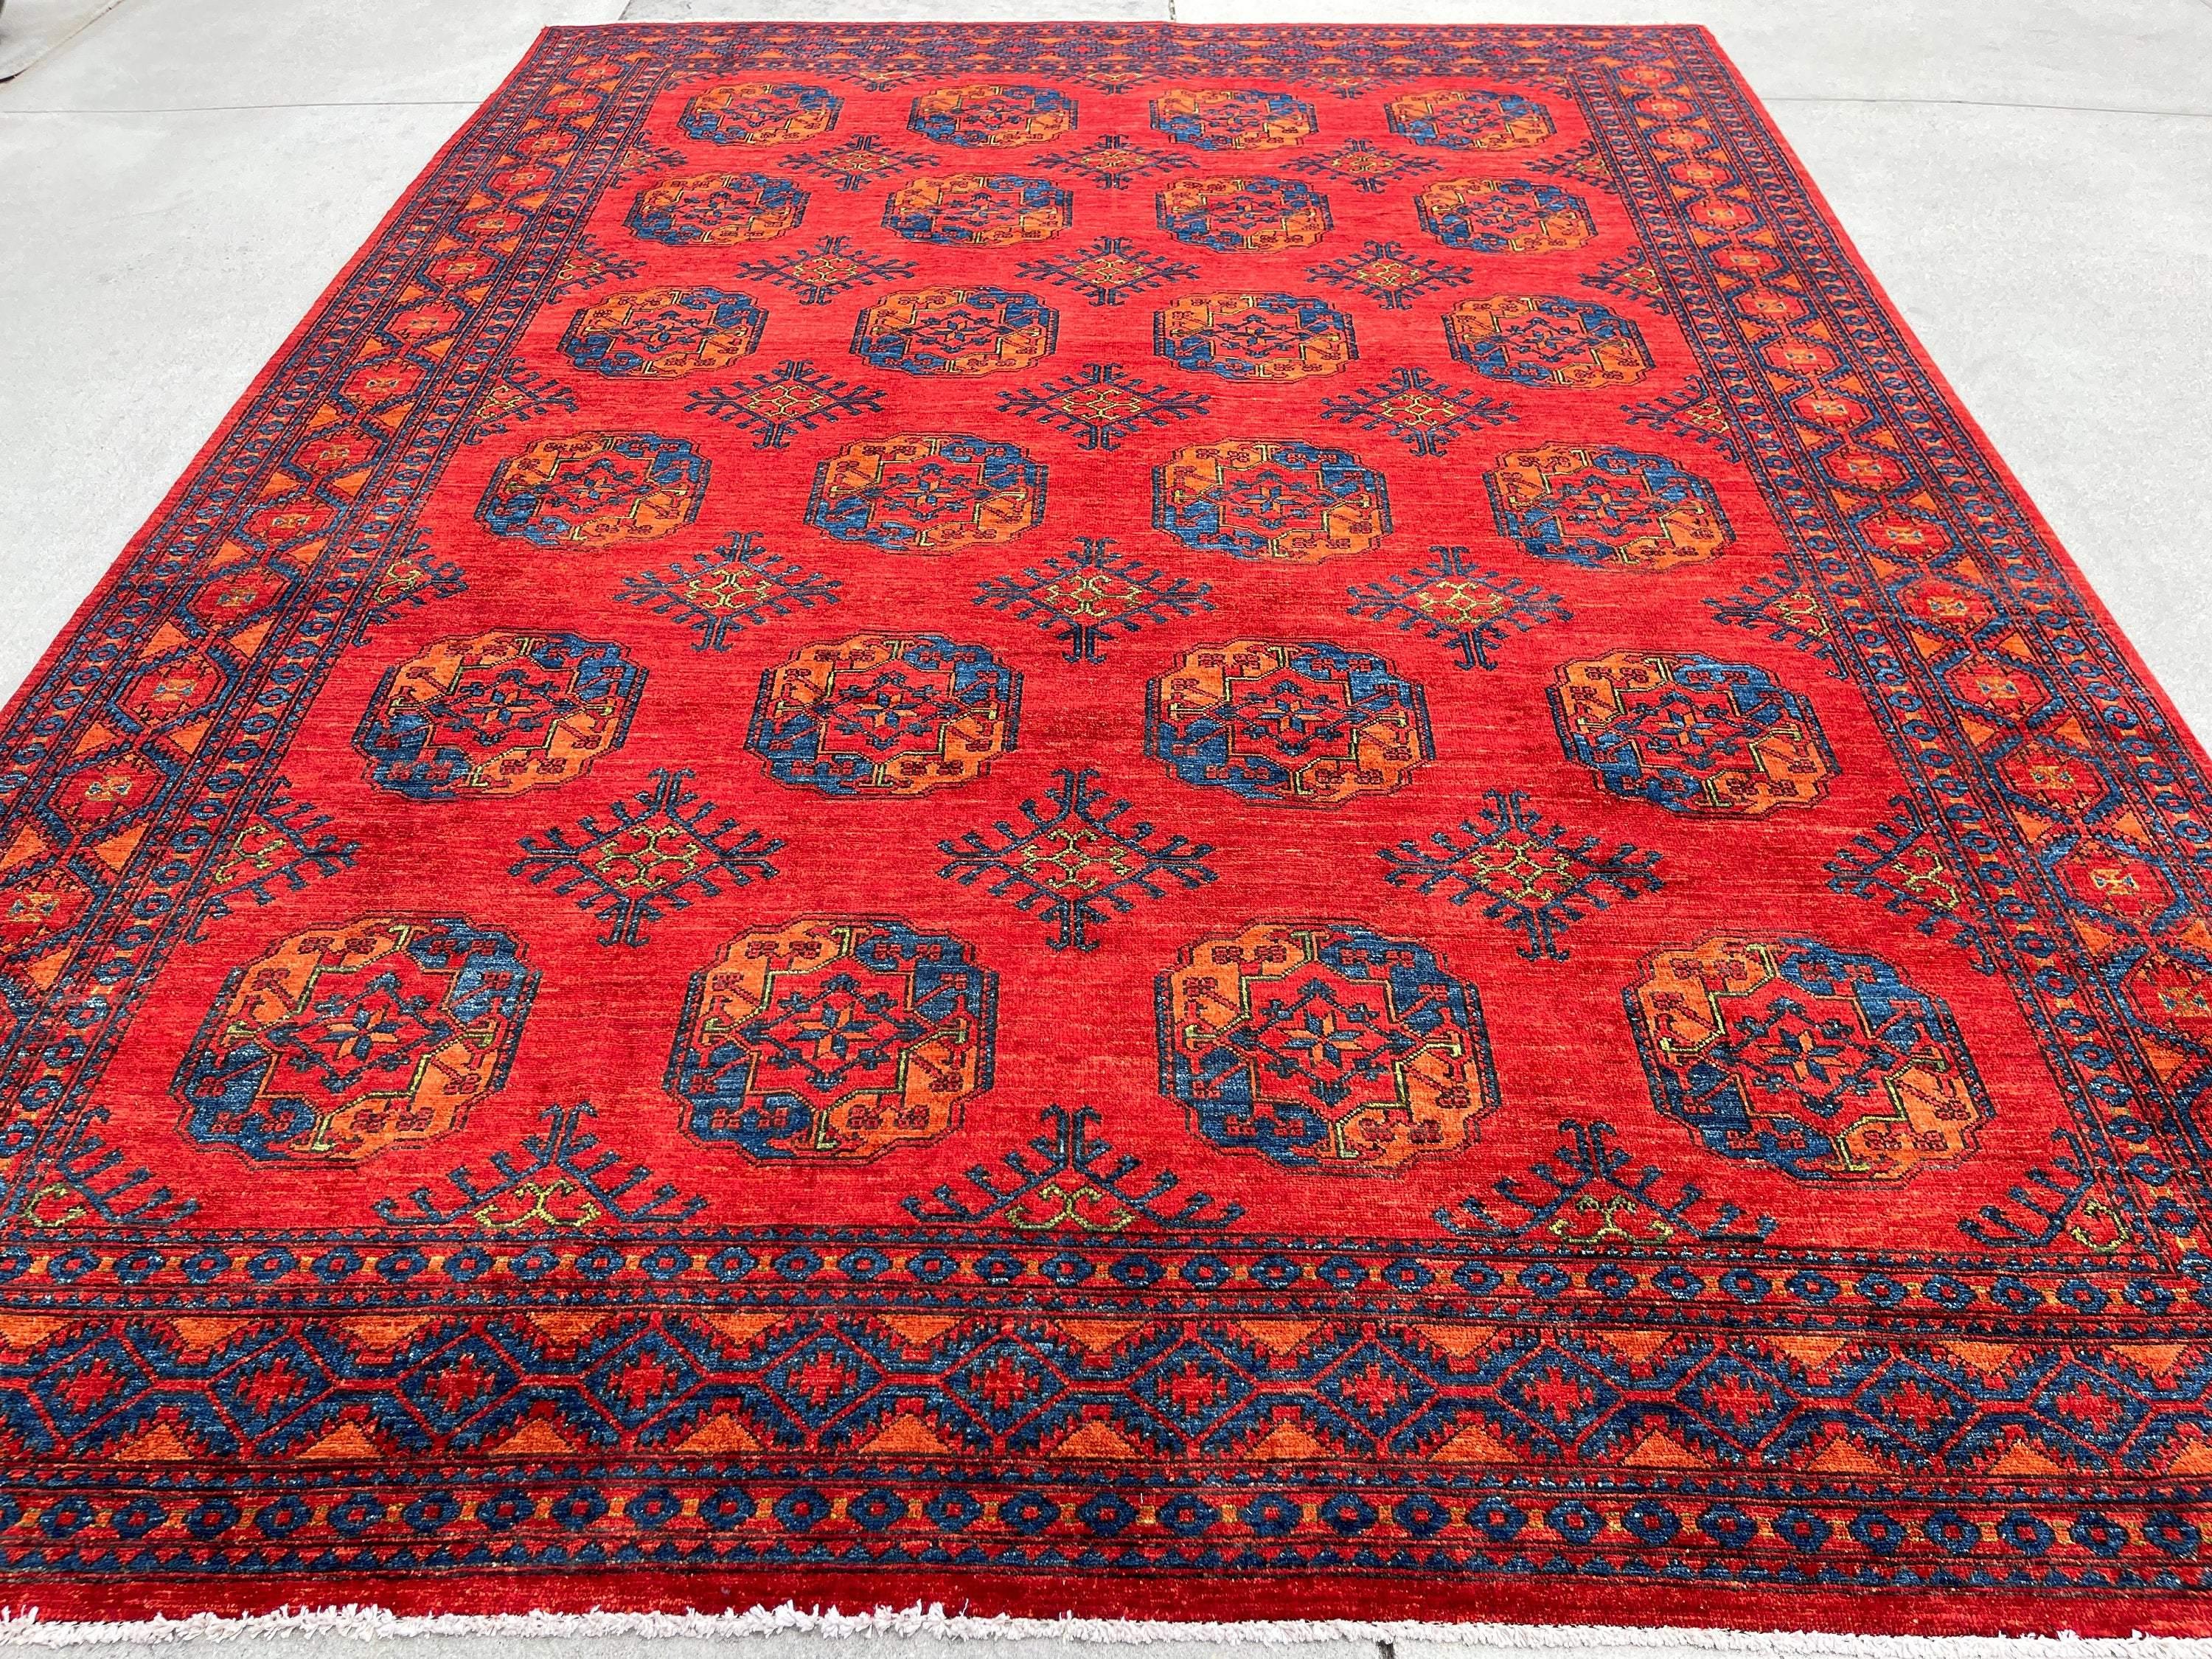 8x11 Hand-Knotted Afghan Rug Premium Hand-Spun Afghan Wool Fair Trade In New Condition For Sale In San Marcos, CA